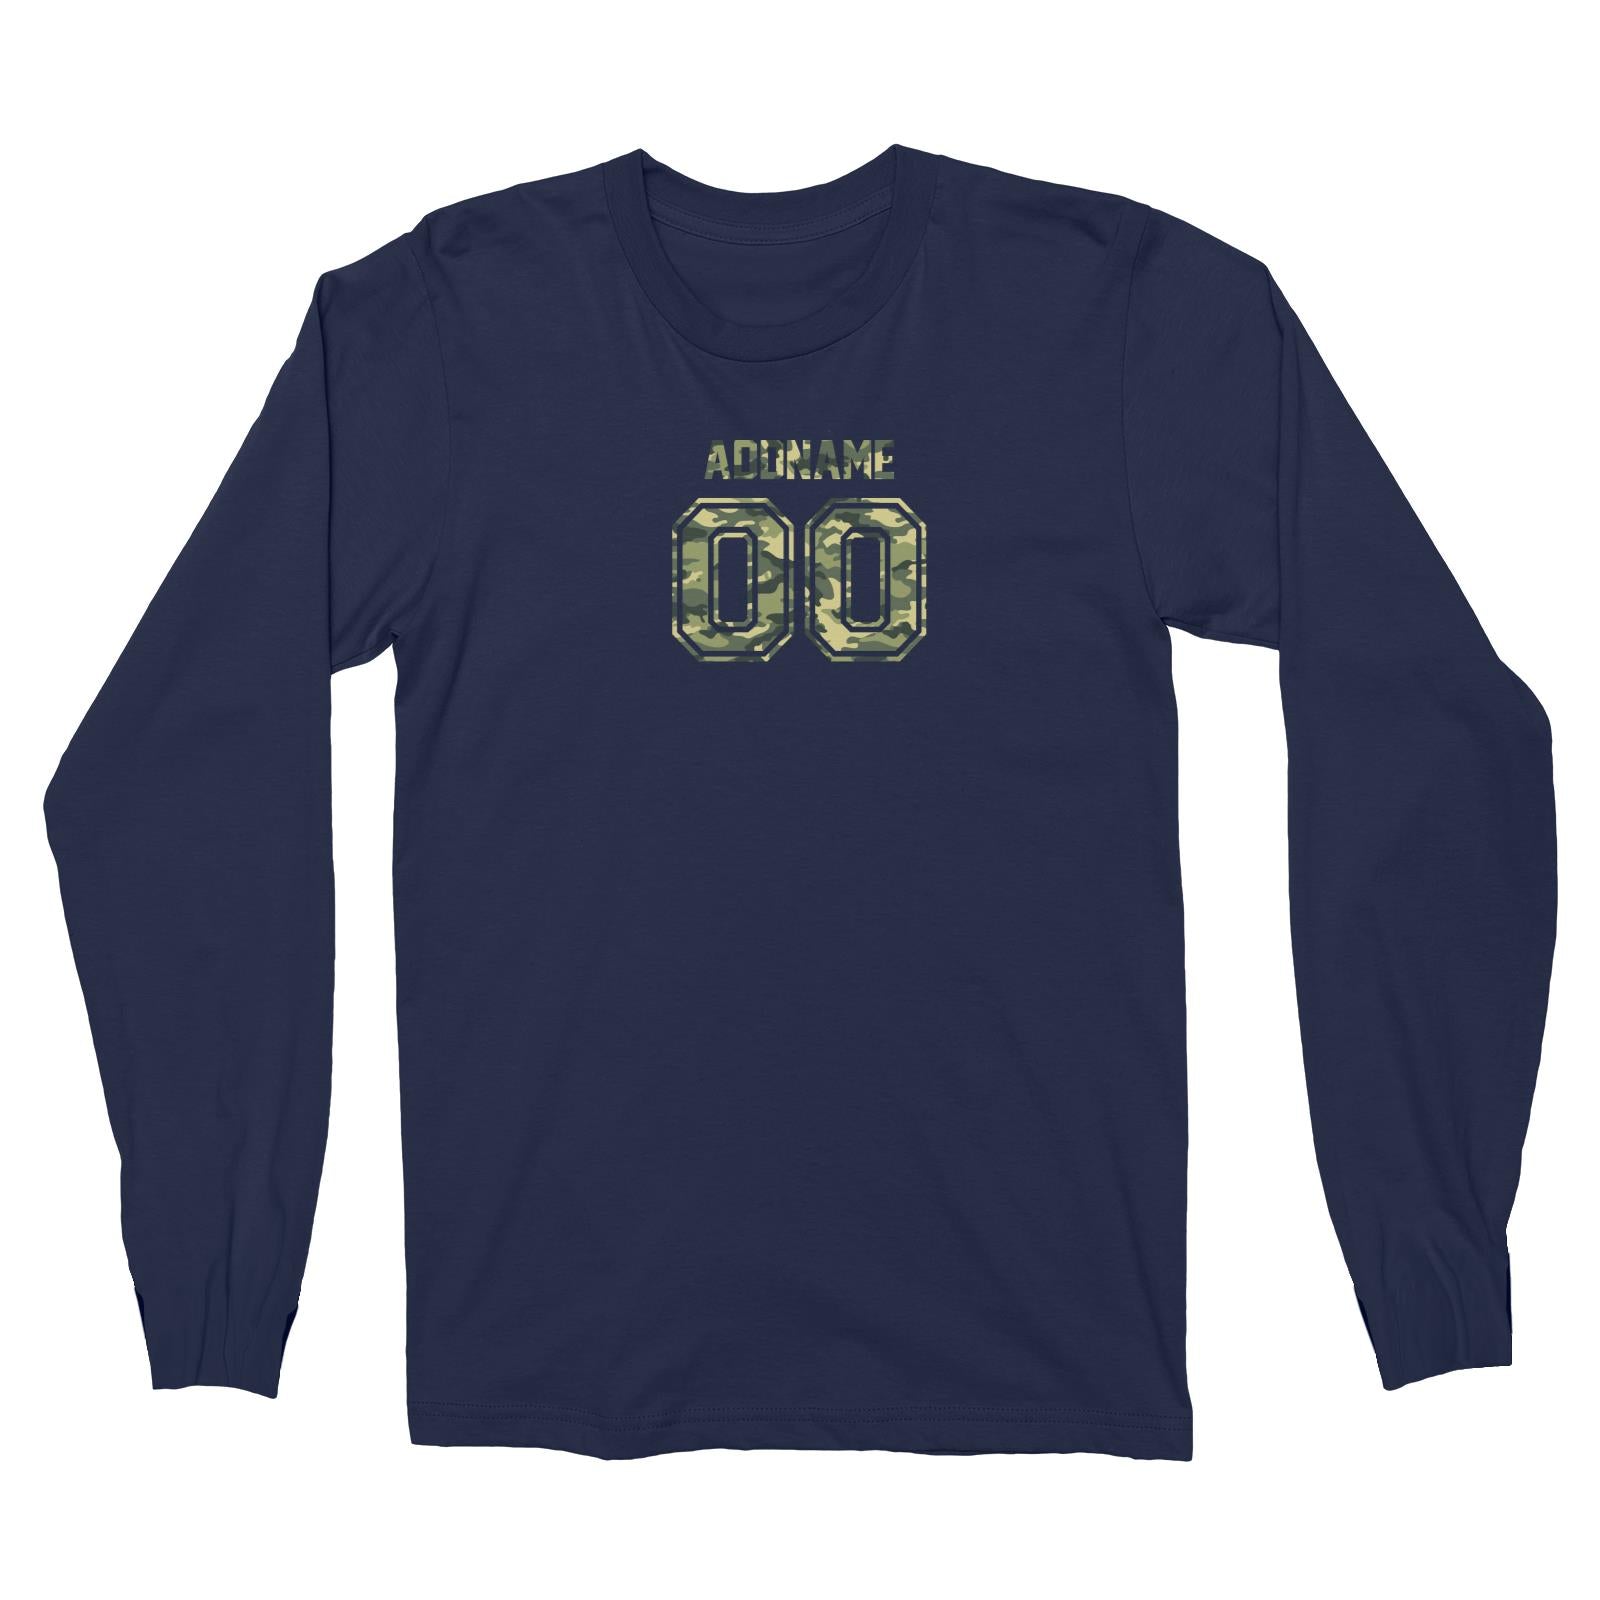 Adults Jersey Green Camo With Name and Number Long Sleeve Unisex T-Shirt